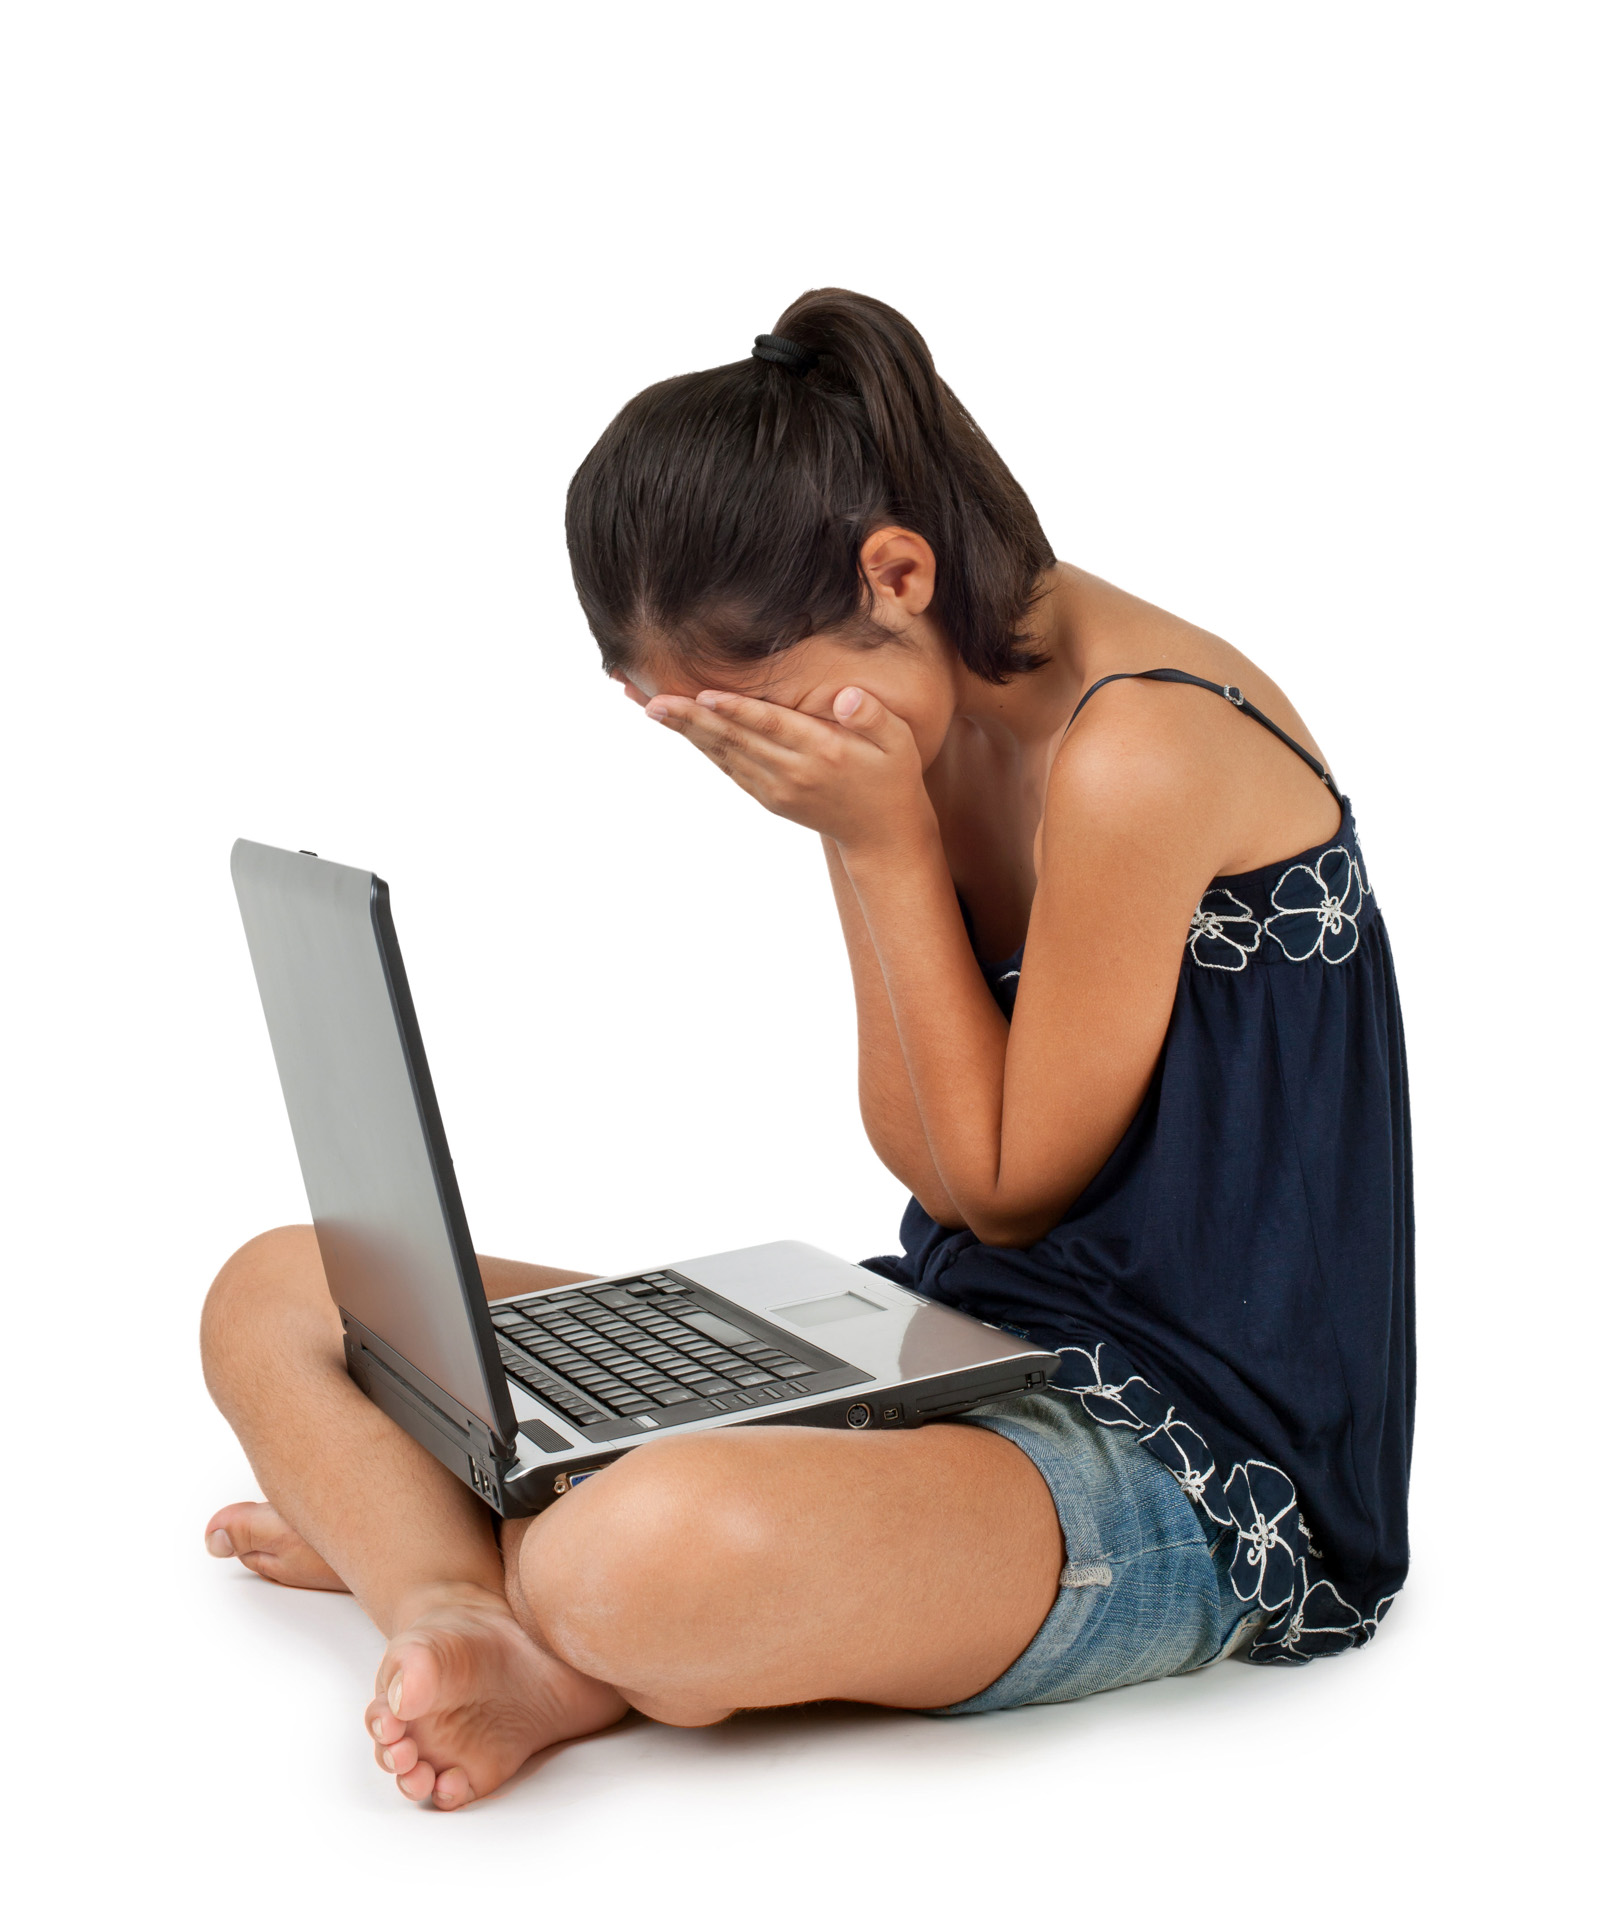 cyber bully girl crying